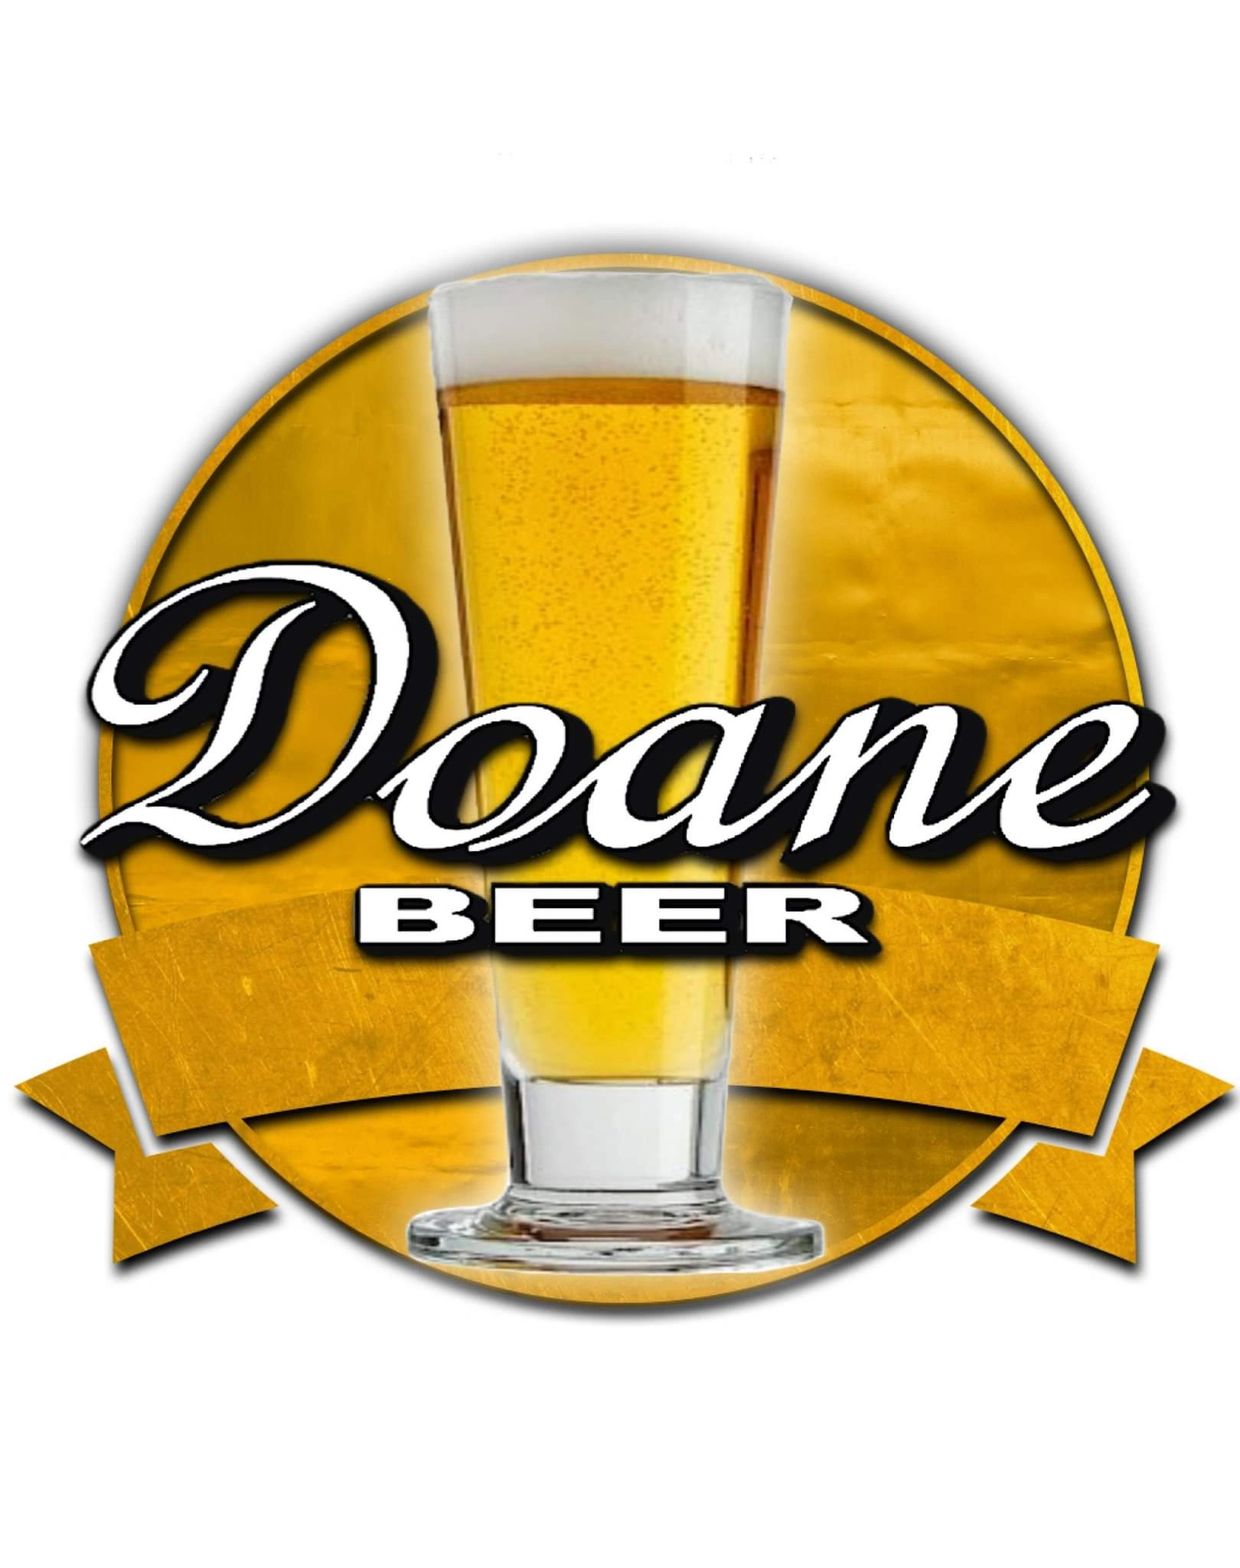 Doane Beer is a easy drinking,
clean crisp lager beer.  
Started in Ashland Wisconsin by the Doane f